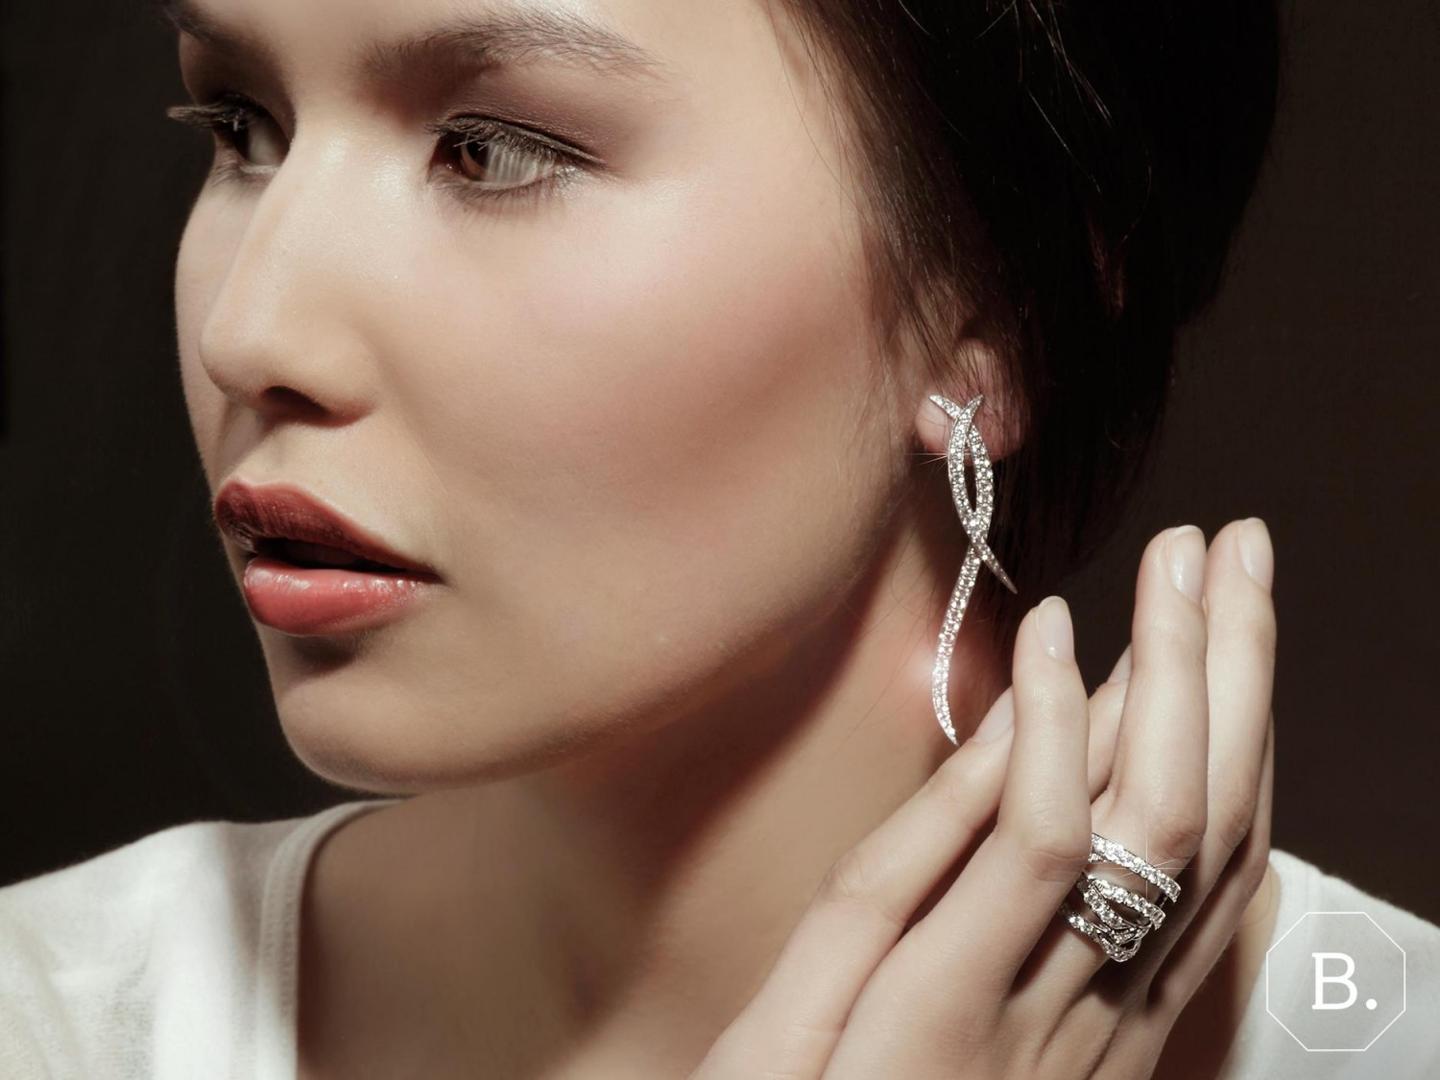 The Chinese luxury jewelry market is booming